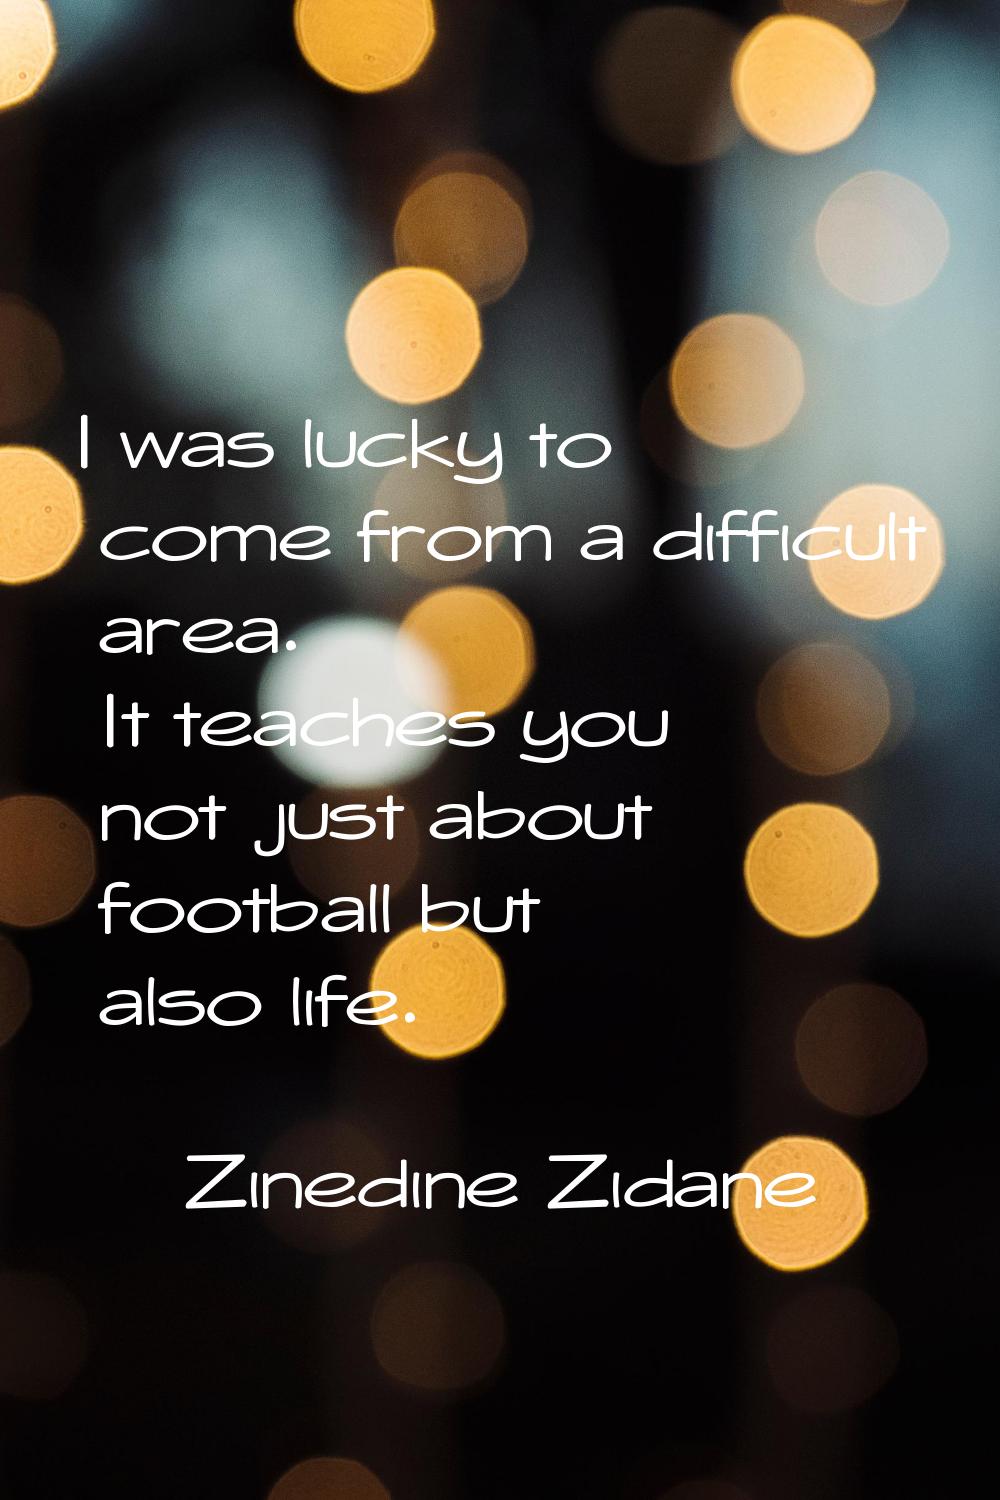 I was lucky to come from a difficult area. It teaches you not just about football but also life.